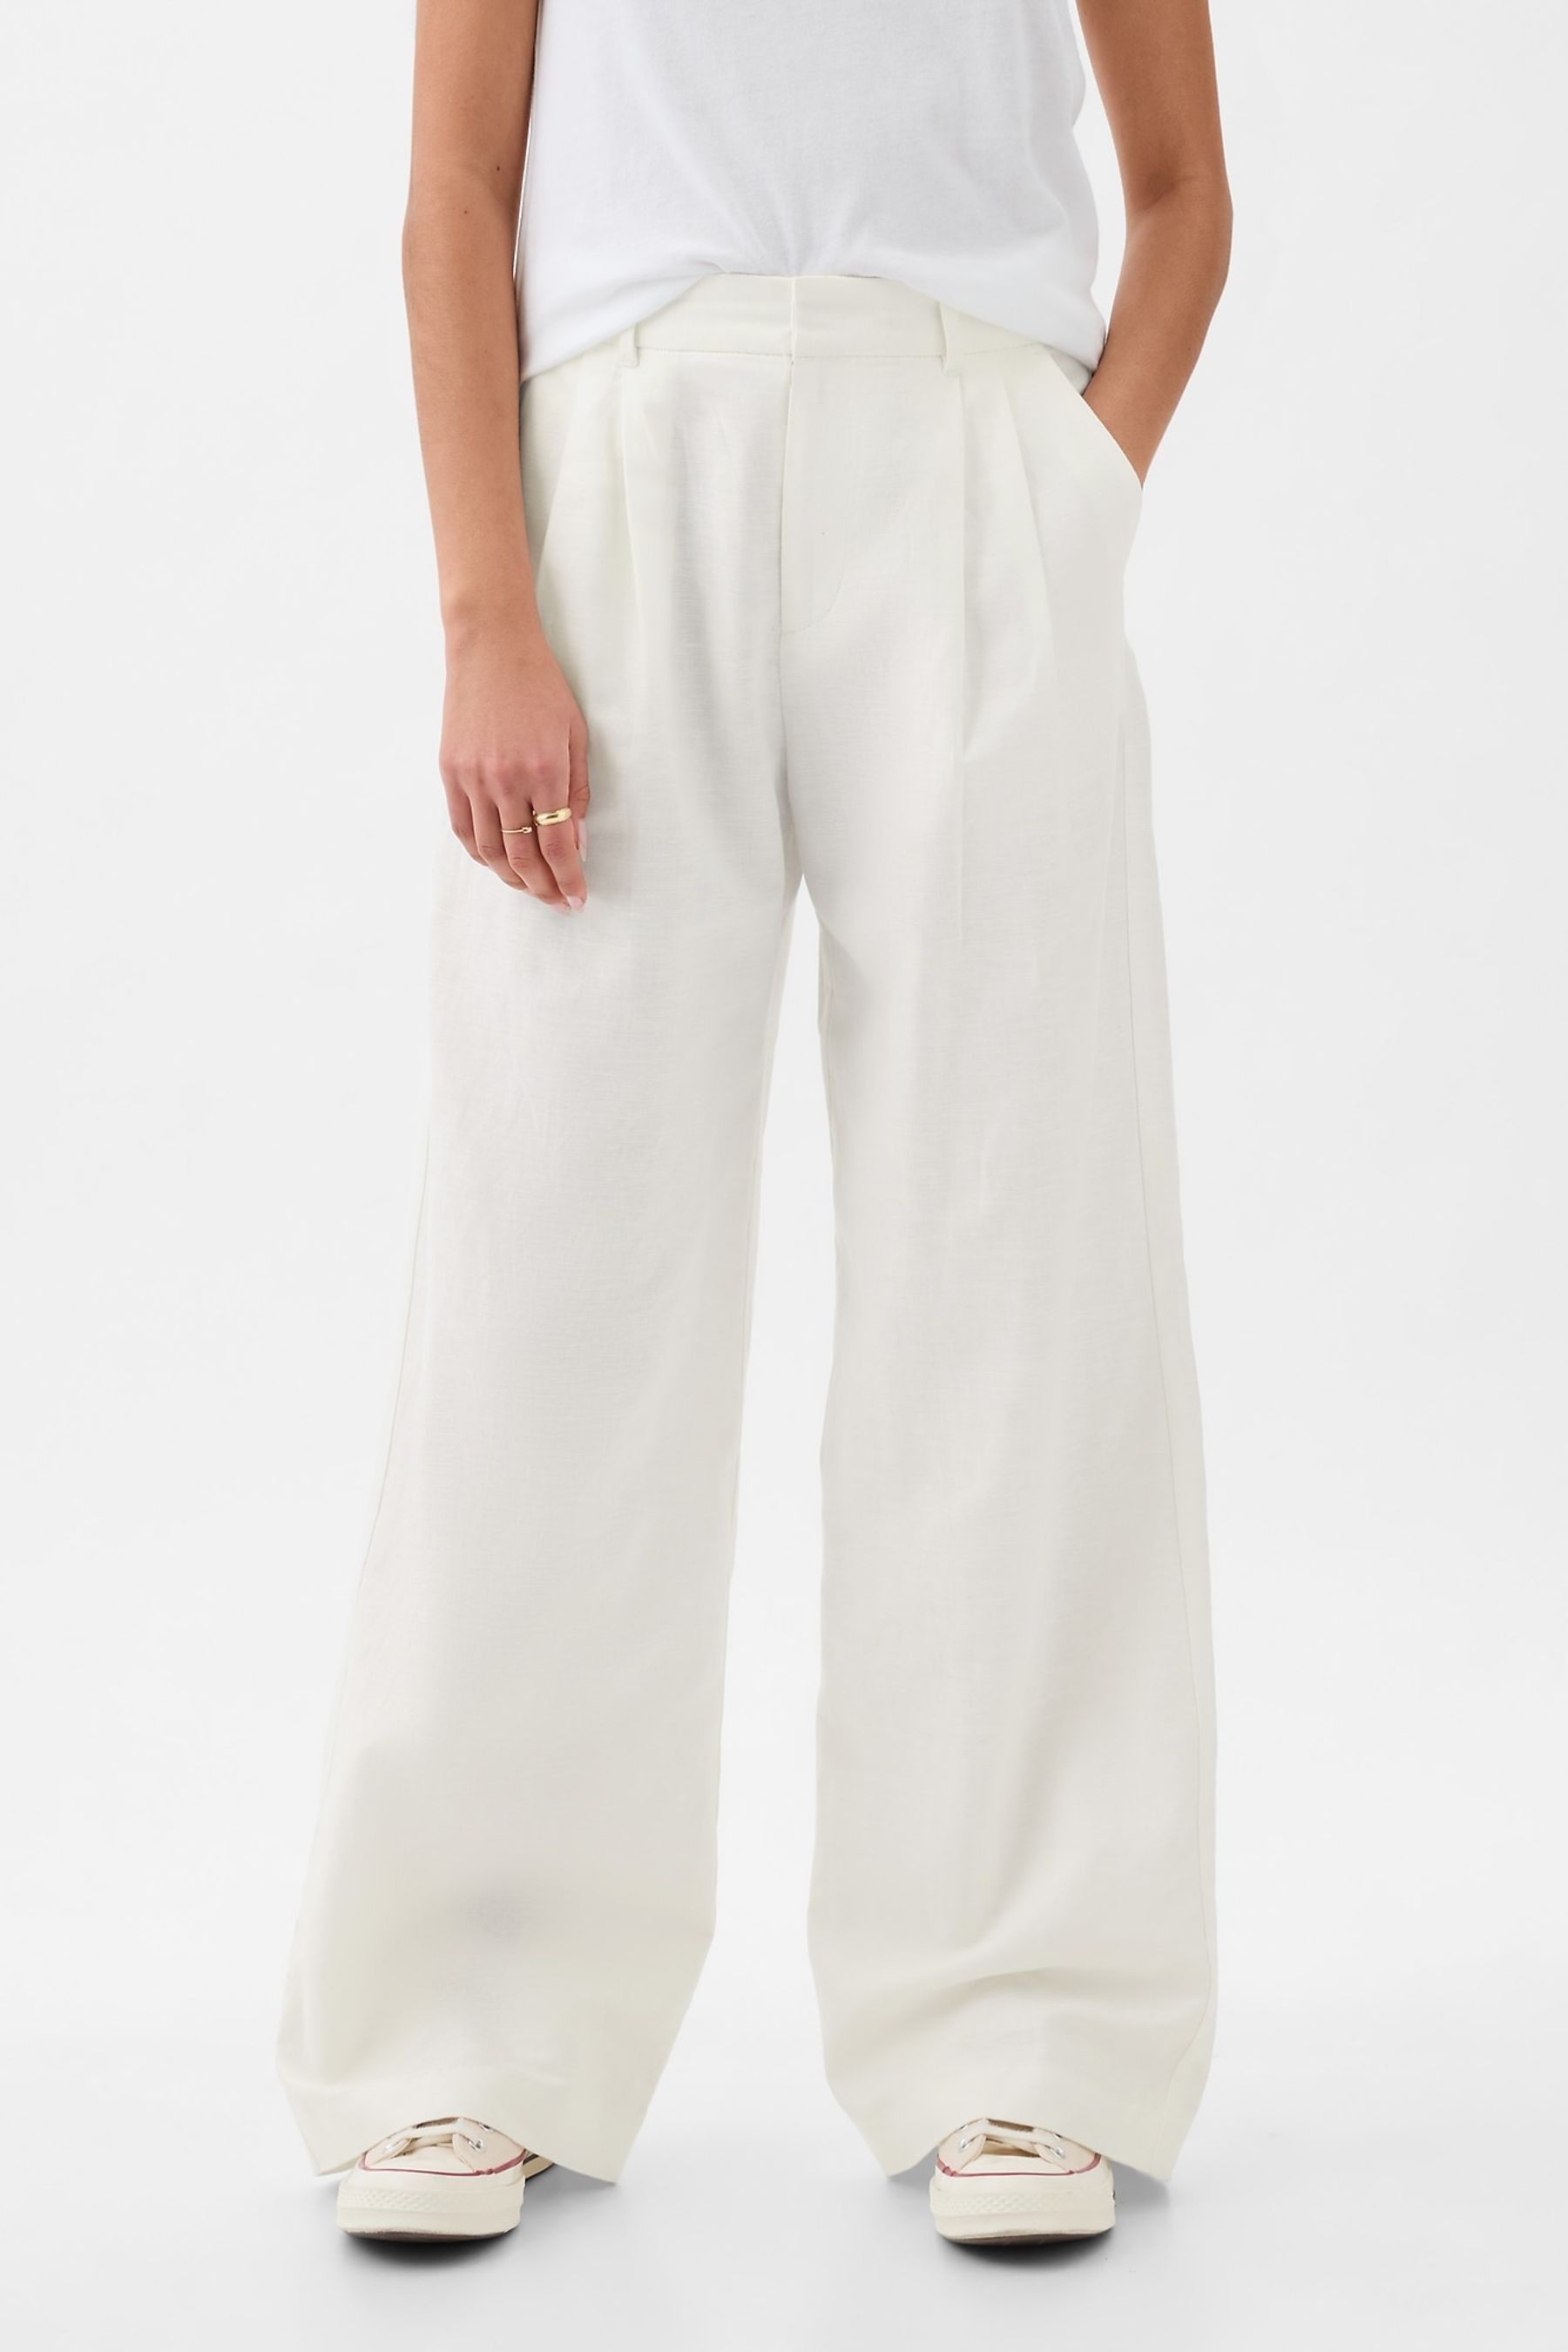 Gap Beige & White Stripe High Waisted Linen Cotton Trousers